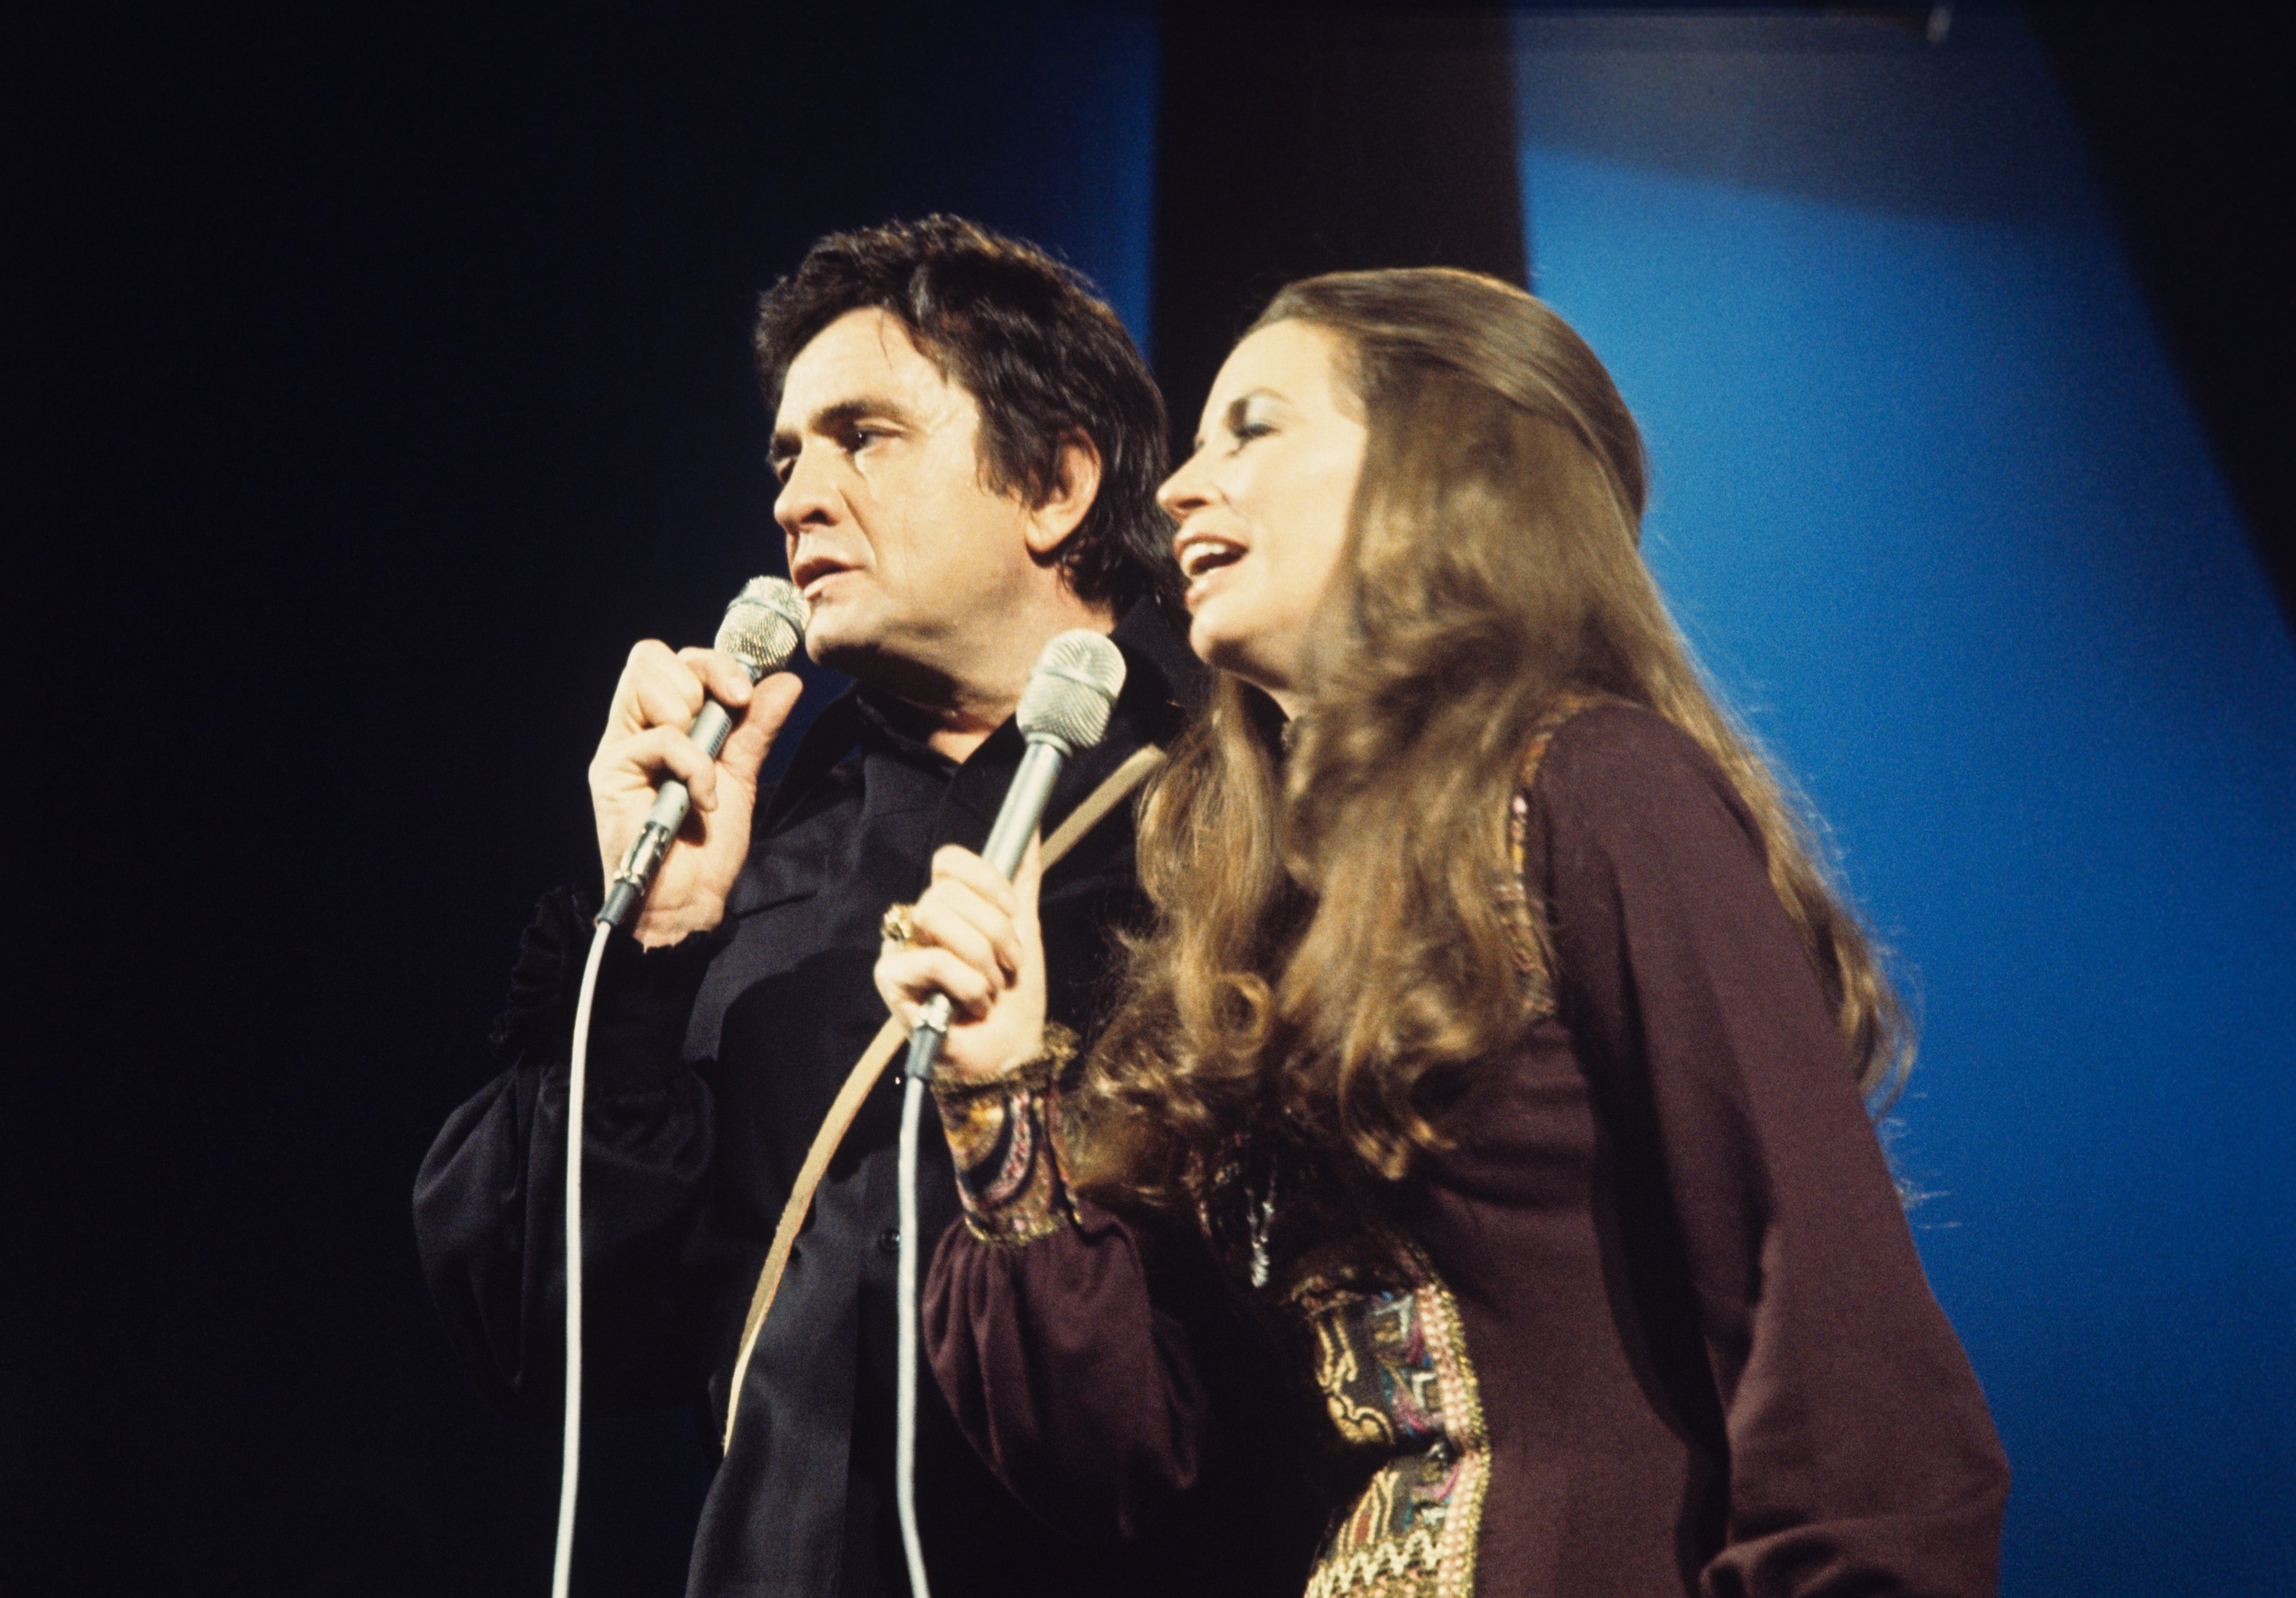 <p>Written by Bob Dylan, Johnny Cash and June Carter weren't yet married when they recorded "It Ain't Me Babe" in 1965. The song was an immediate hit and offered a peek into the couple's romantic future. They would be married just three years later, and go on to build one of the genre's most enduring legacies. </p>